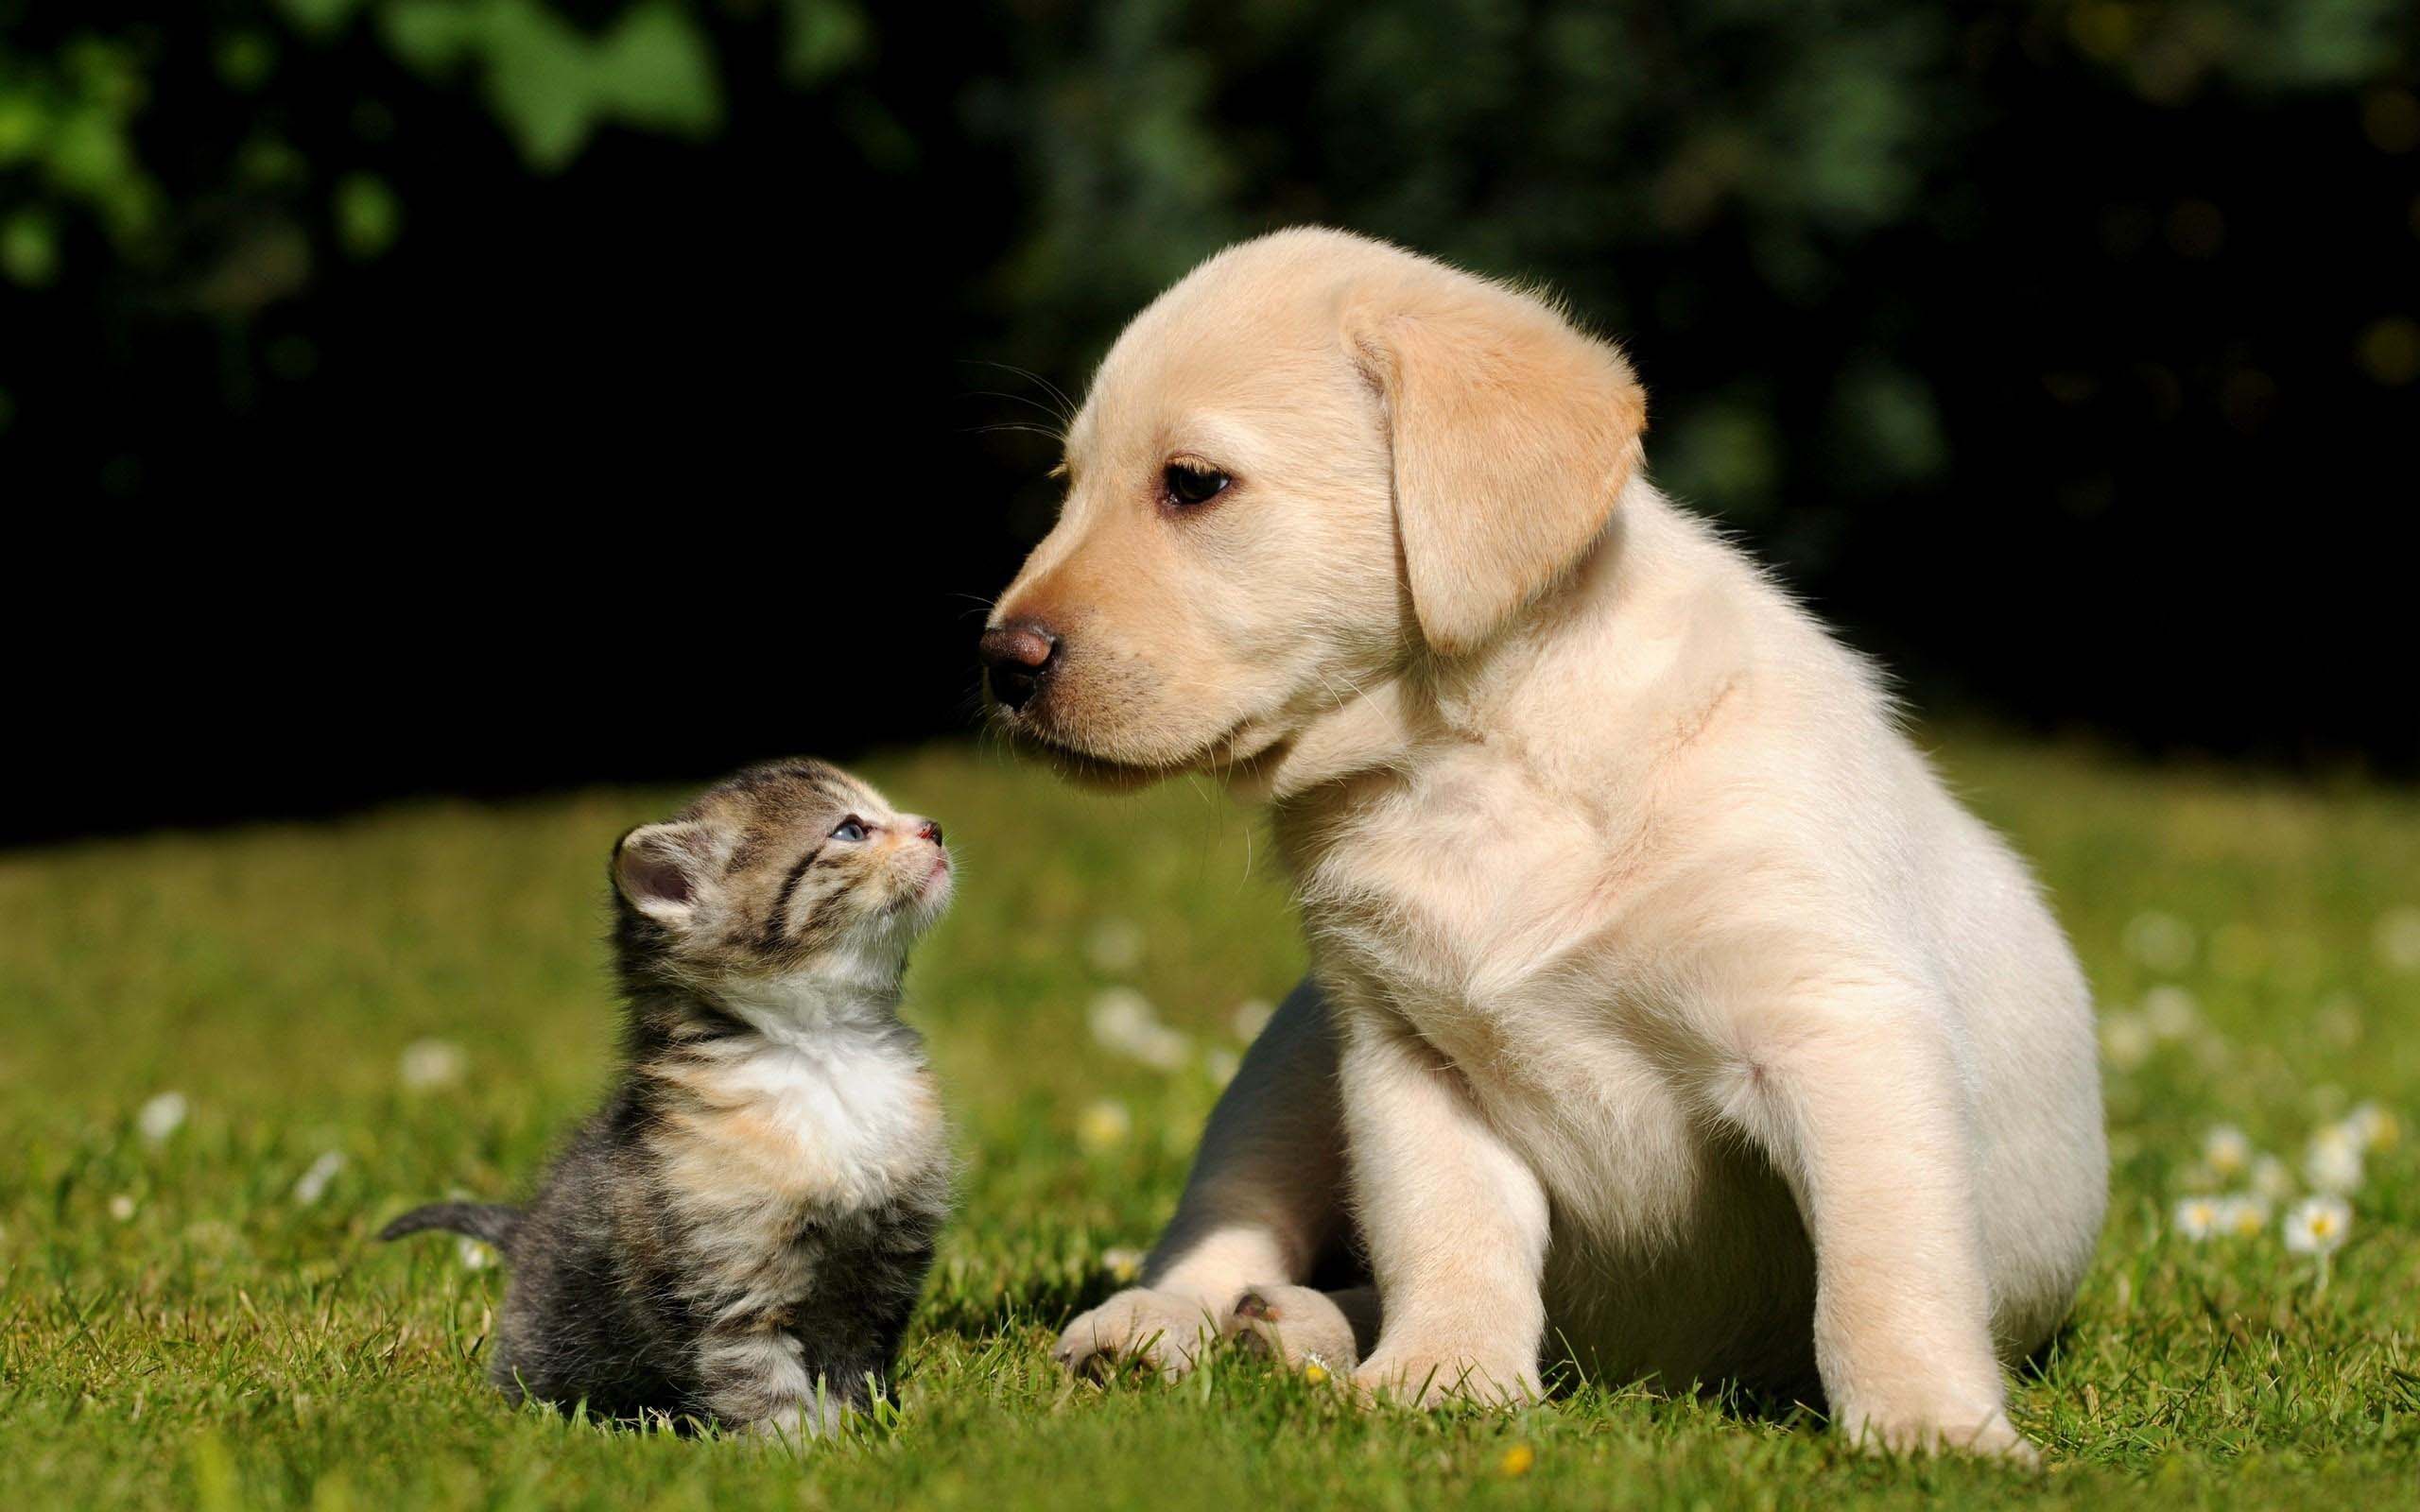 Cute Dog and Cat Wallpaper | Wallpapers, Backgrounds, Images, Art ...